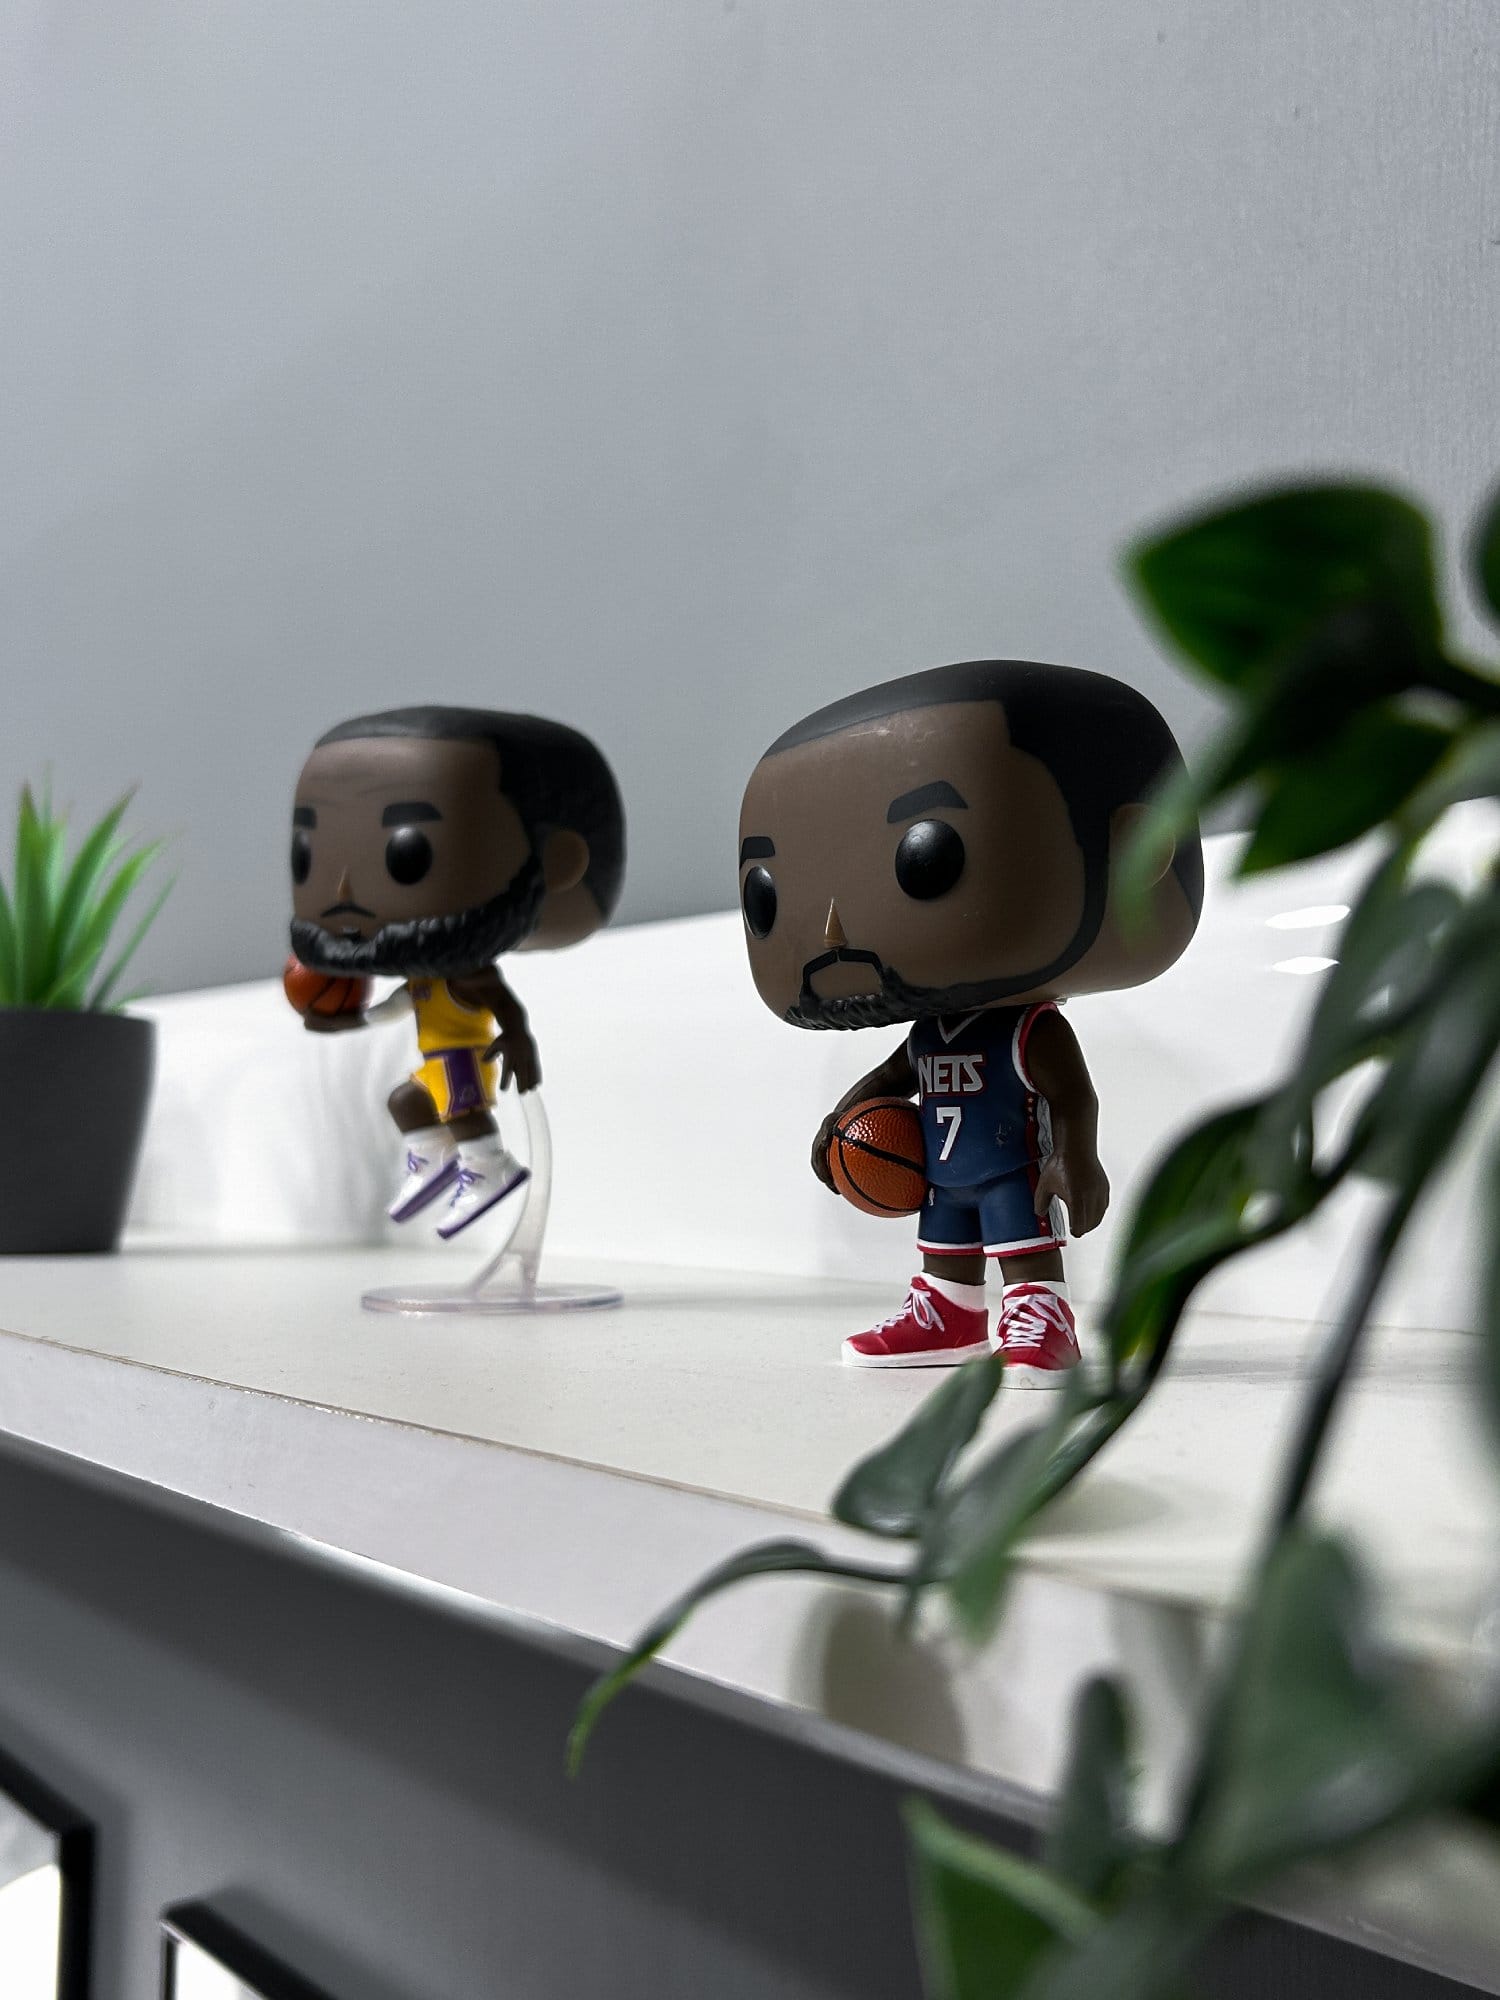 The Funko POP! figures of LeBron James and Kevin Durant